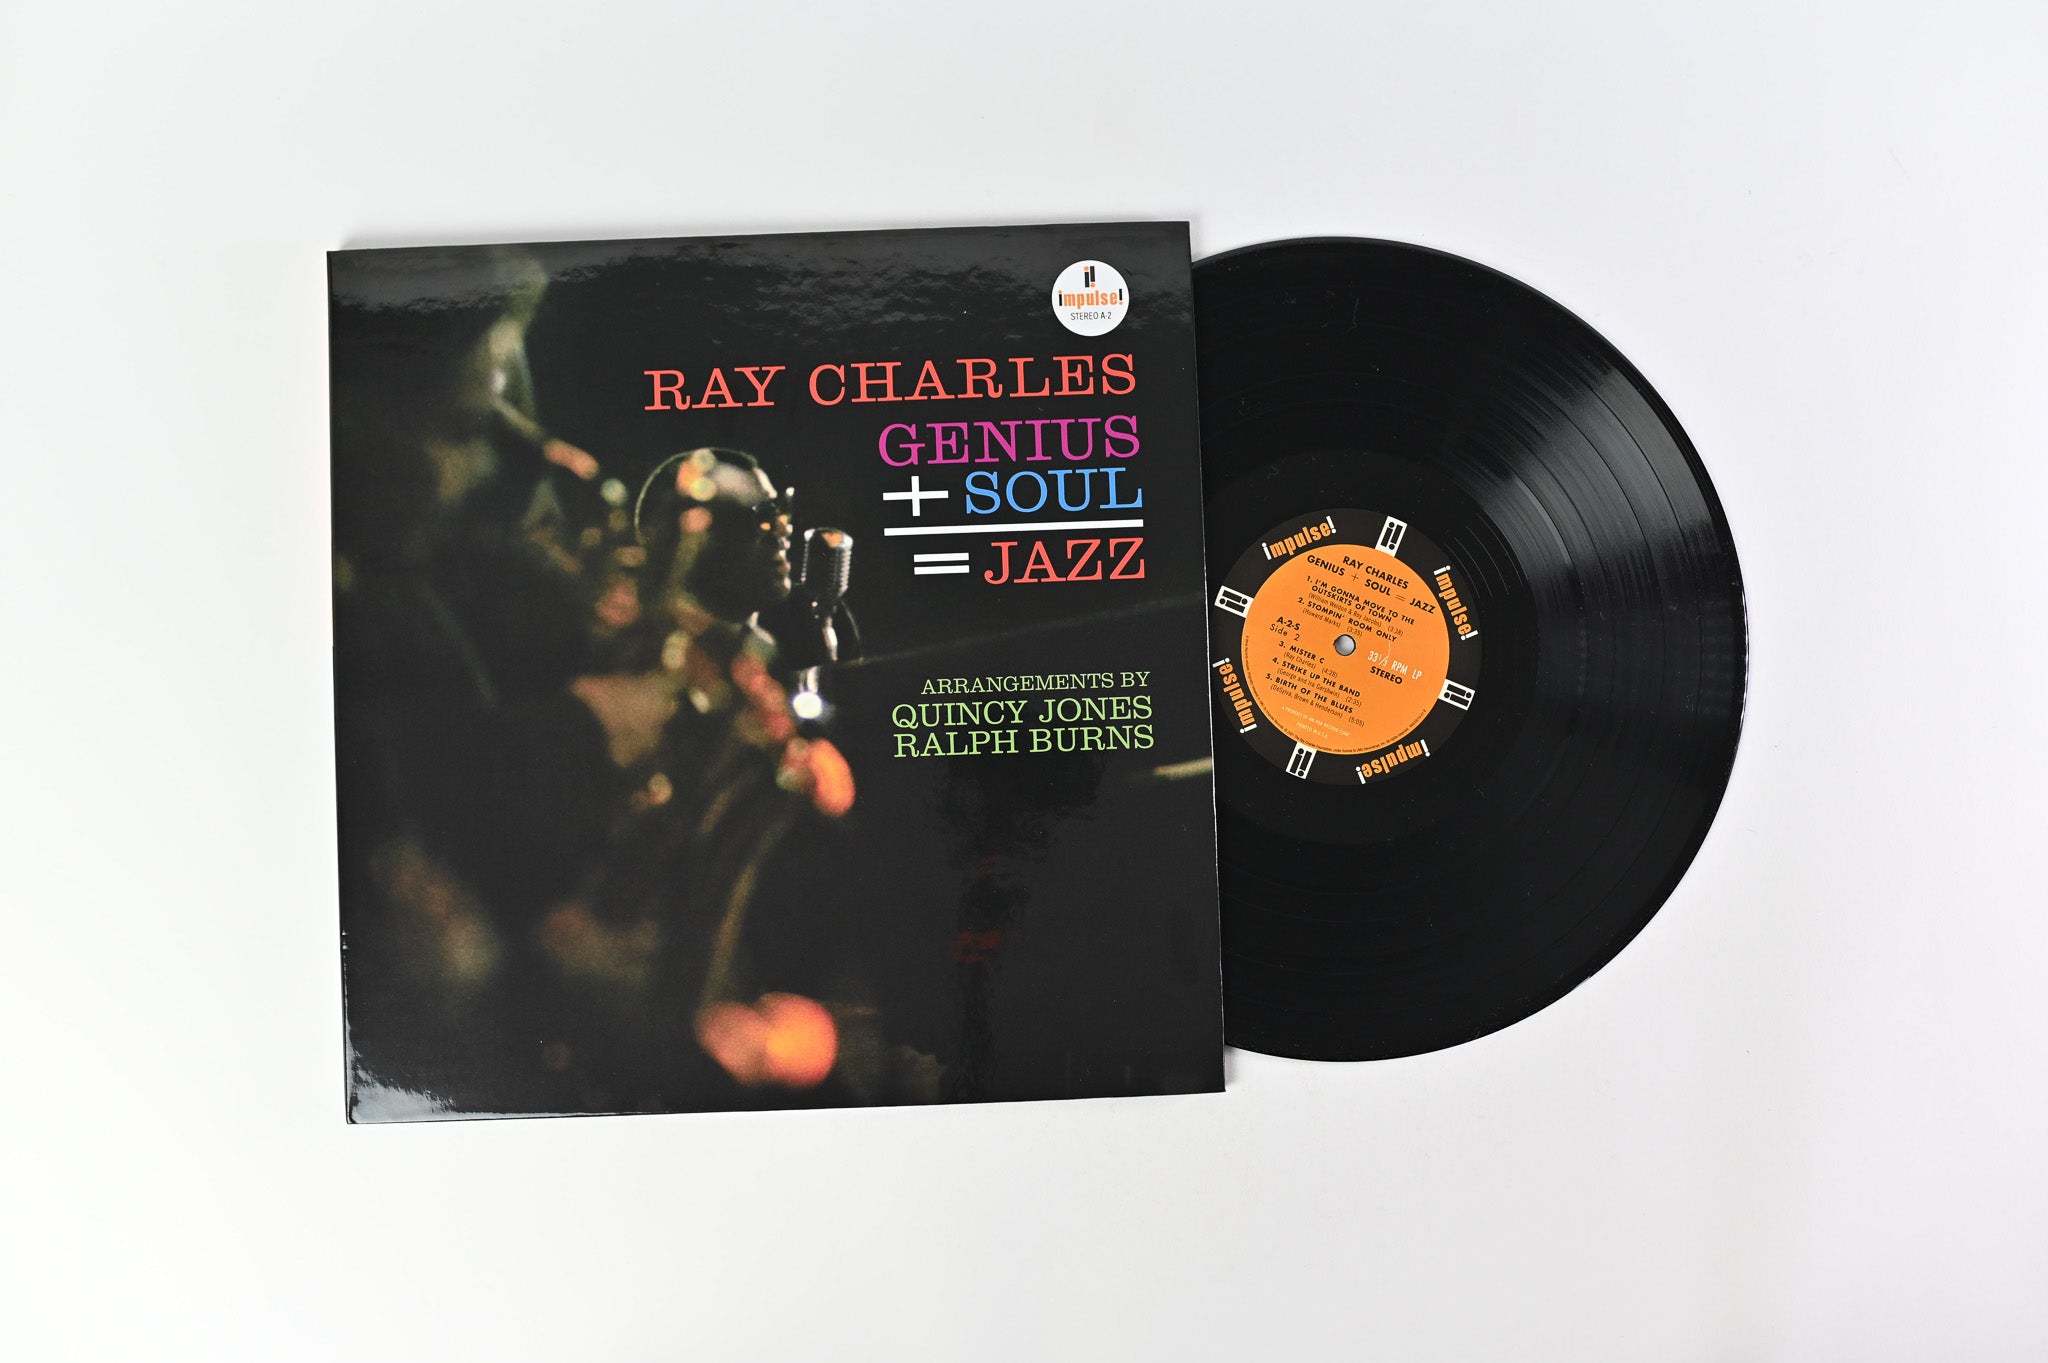 Ray Charles - Genius + Soul = Jazz Reissue on Impulse!/Acoustic Sounds Series